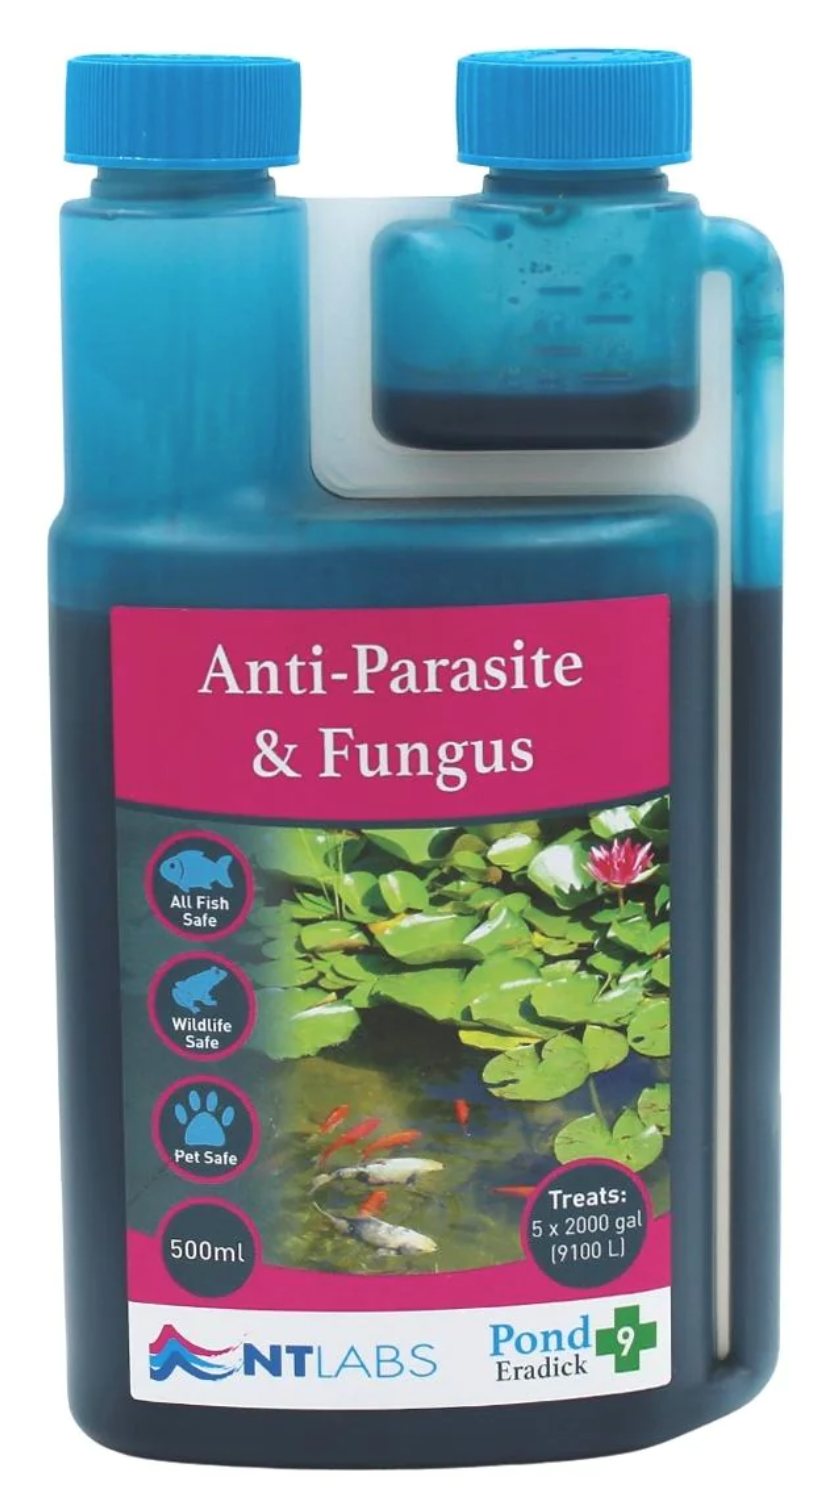 NT LABS Pond Eradick 500ml (treat fungus and fin rot)  by NT LABS